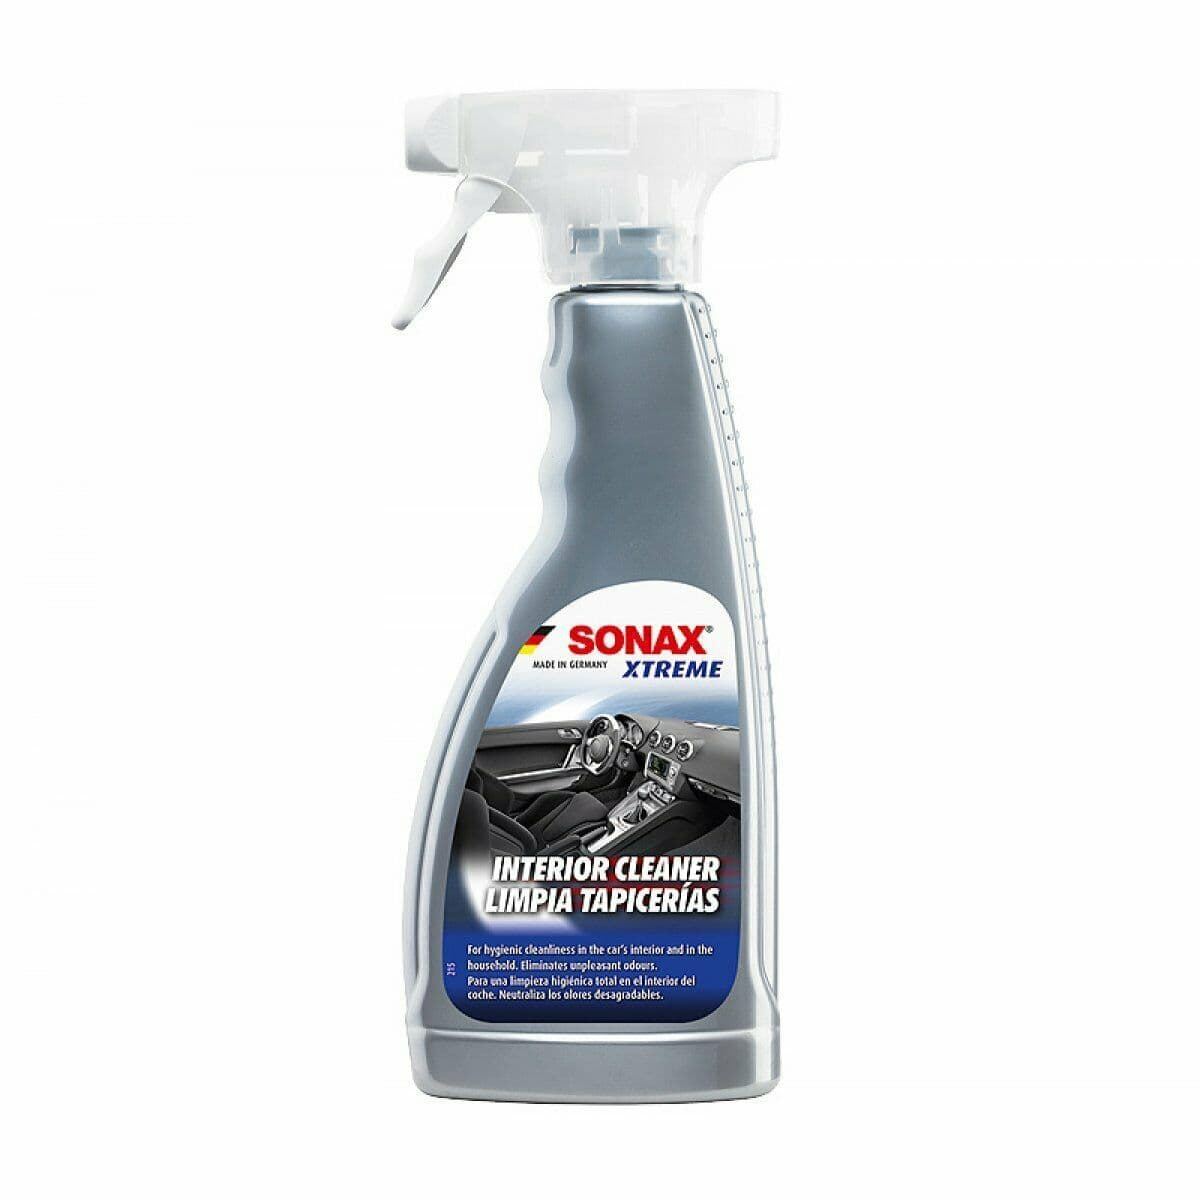 Sonax Xtreme Car Interior Cleaner & Stain Remover 500ml